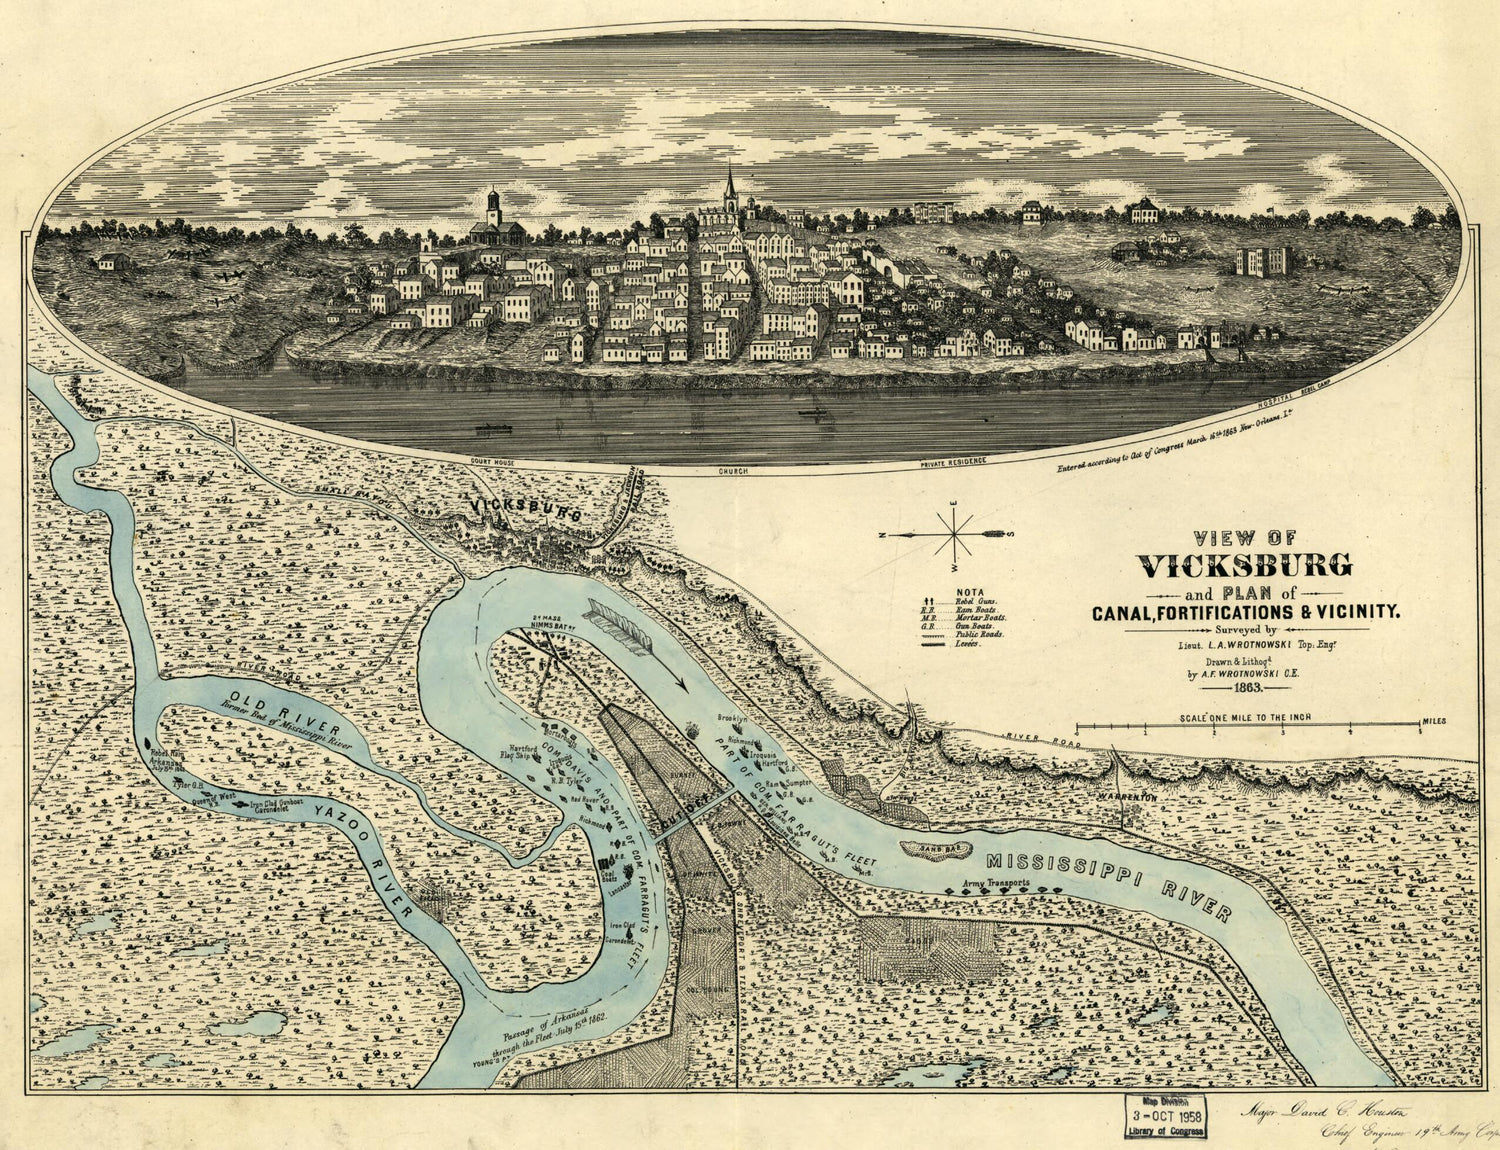 This old map of View of Vicksburg and Plan of the Canal, Fortifications &amp; Vicinity from 1863 was created by L. A. Wrotnowski in 1863